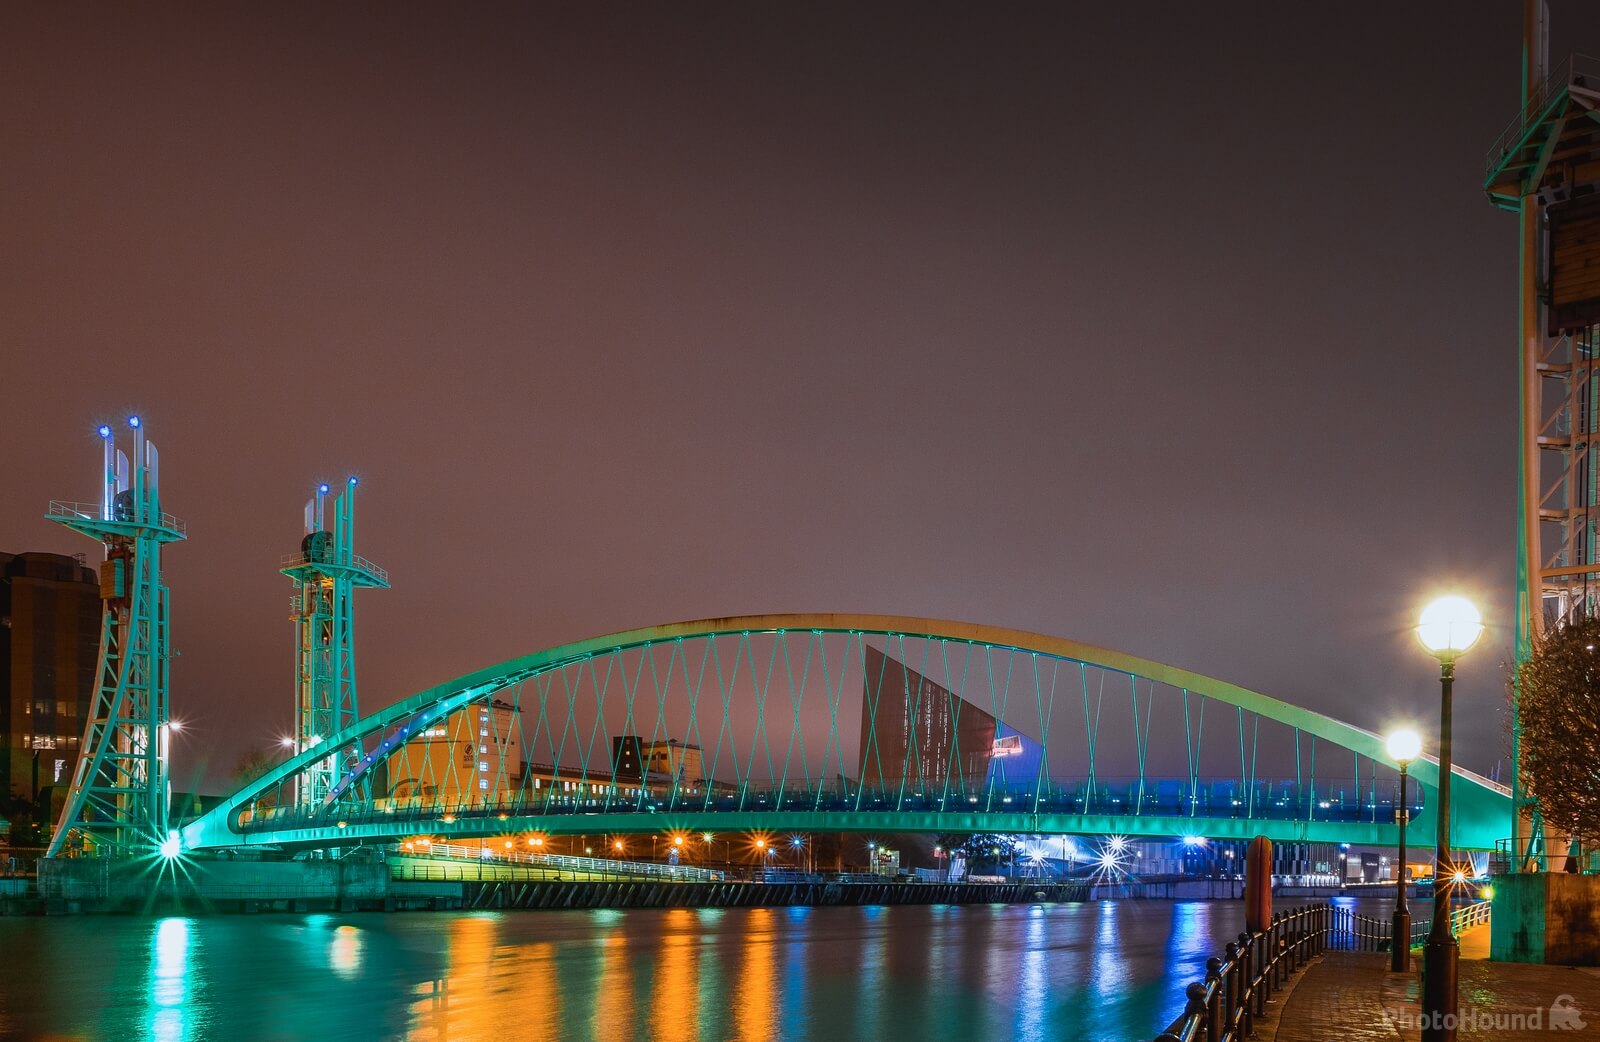 Image of Salford Quays by Andy Killingbeck